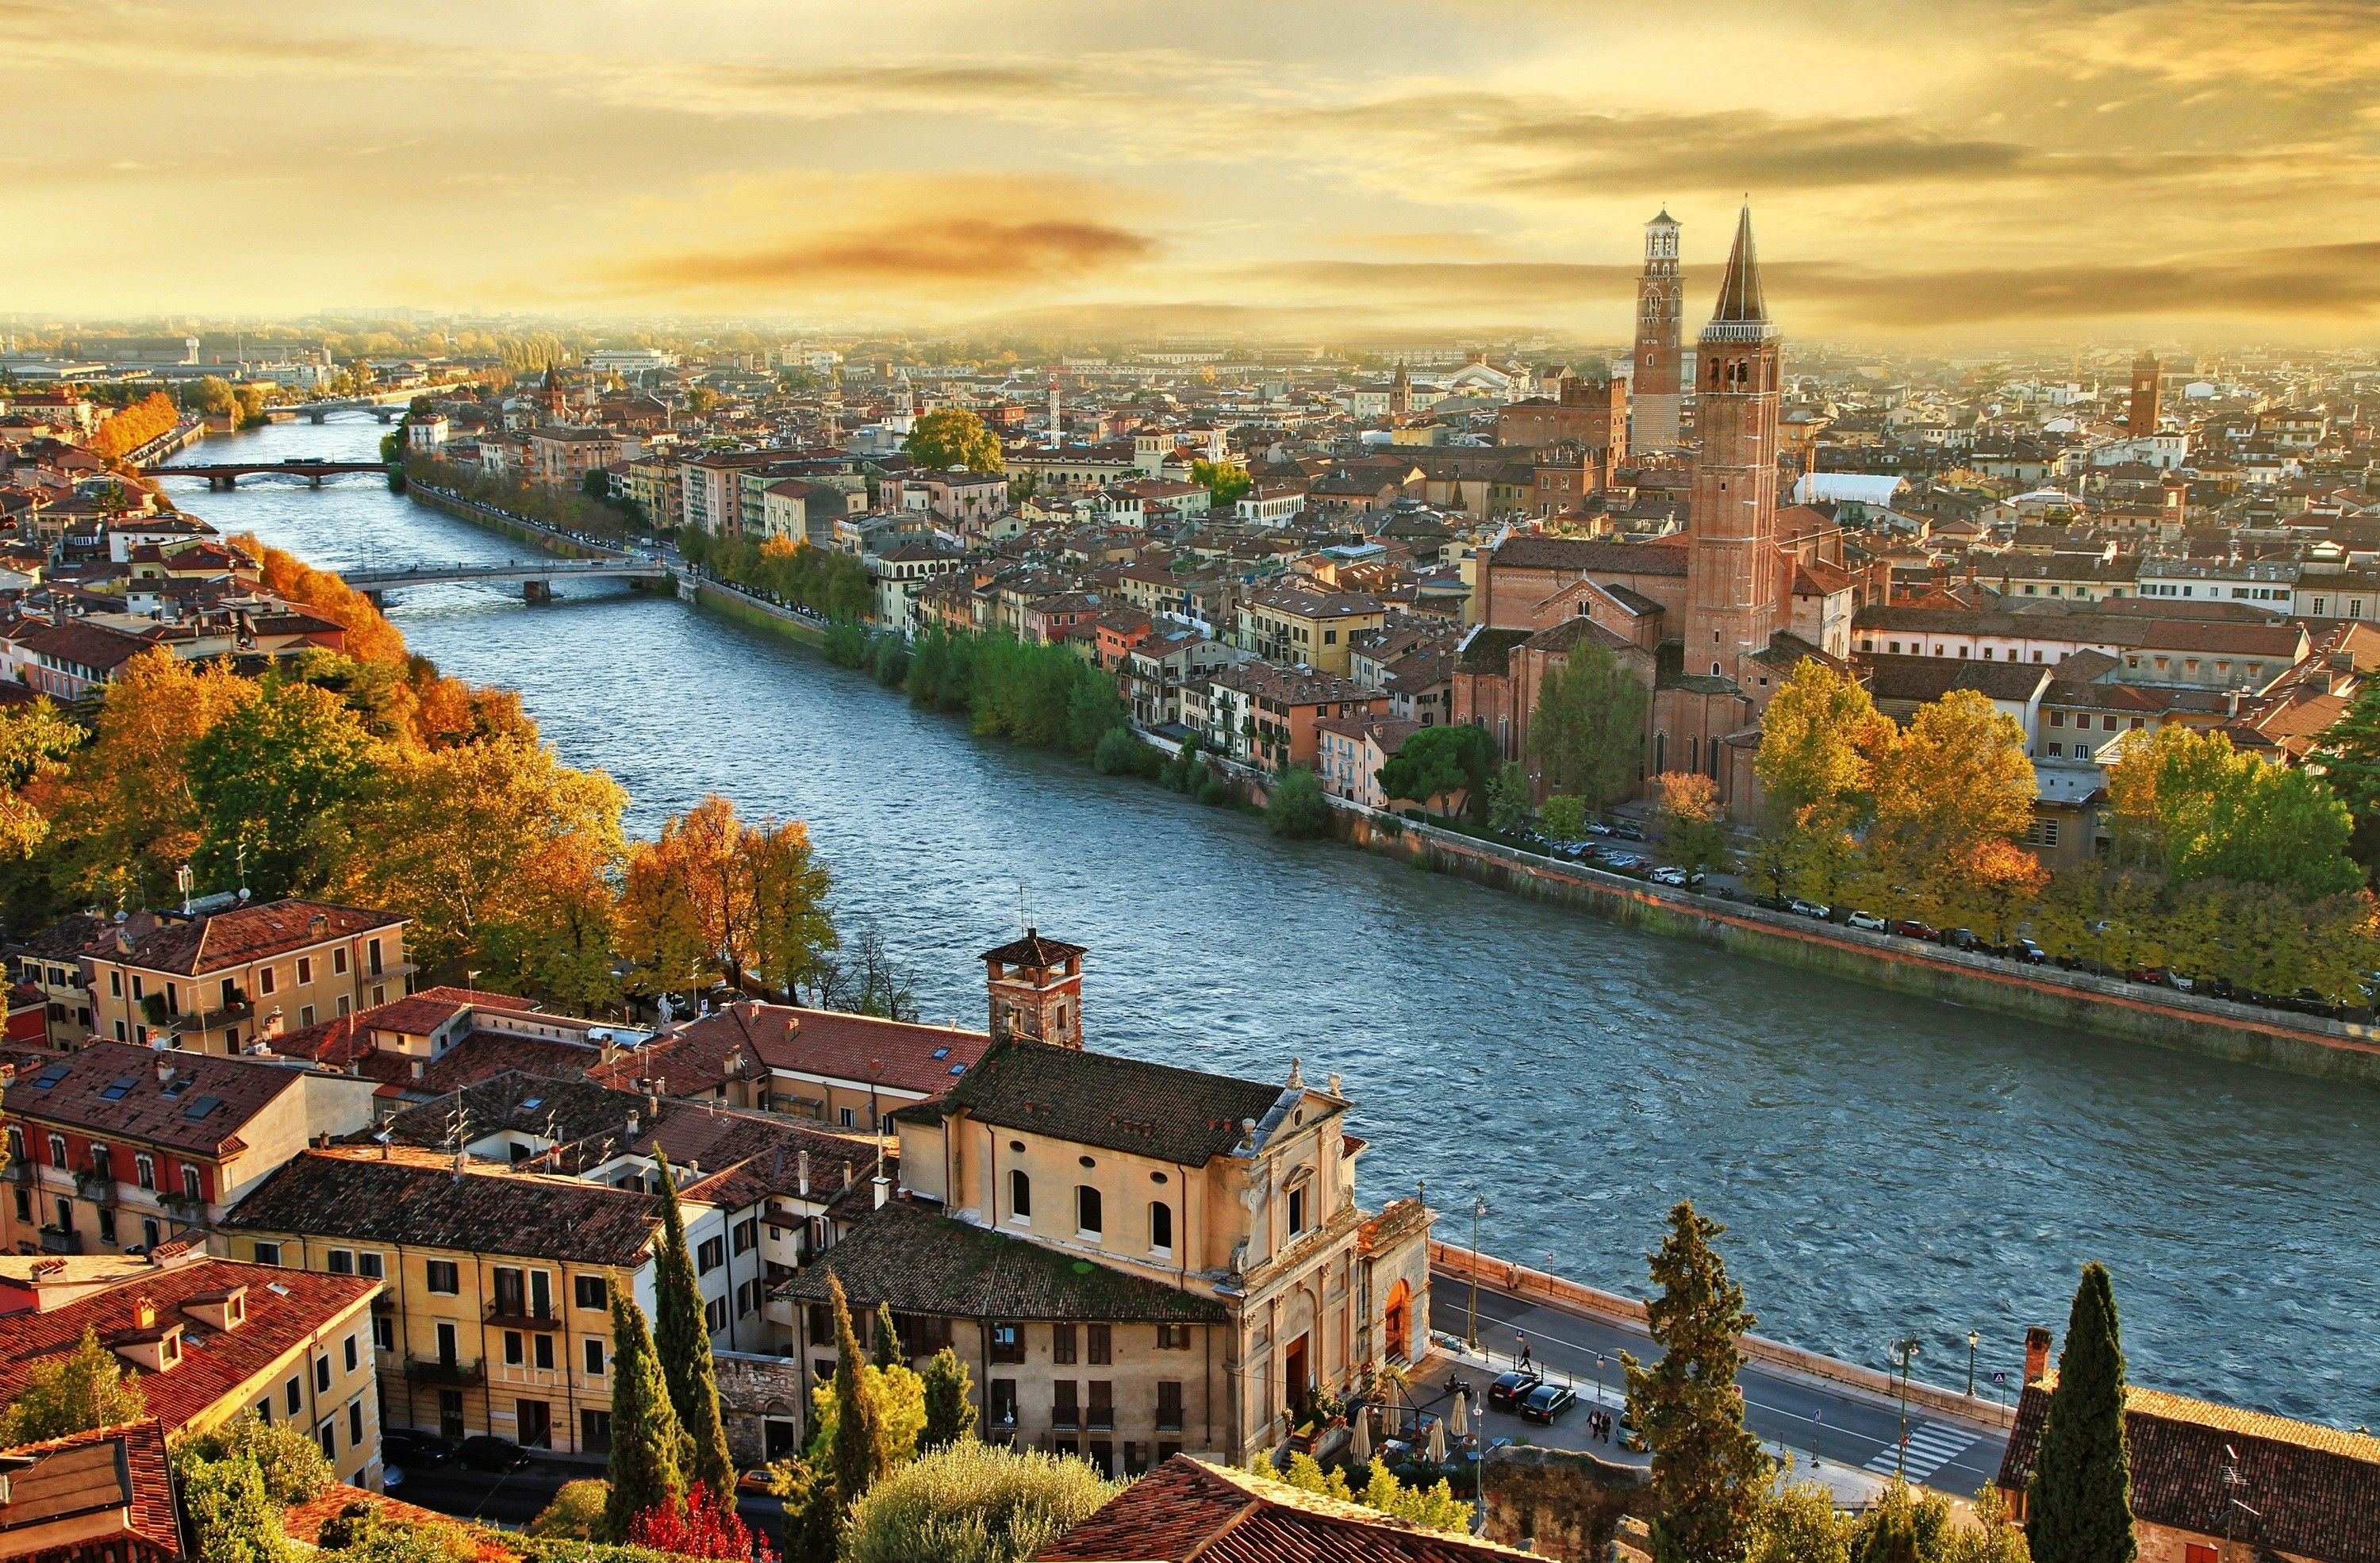 Cityscape: A view of the Adige river and the medieval Catholic church in Verona from Castel San Pietro, Italy. 3000x1970 HD Wallpaper.